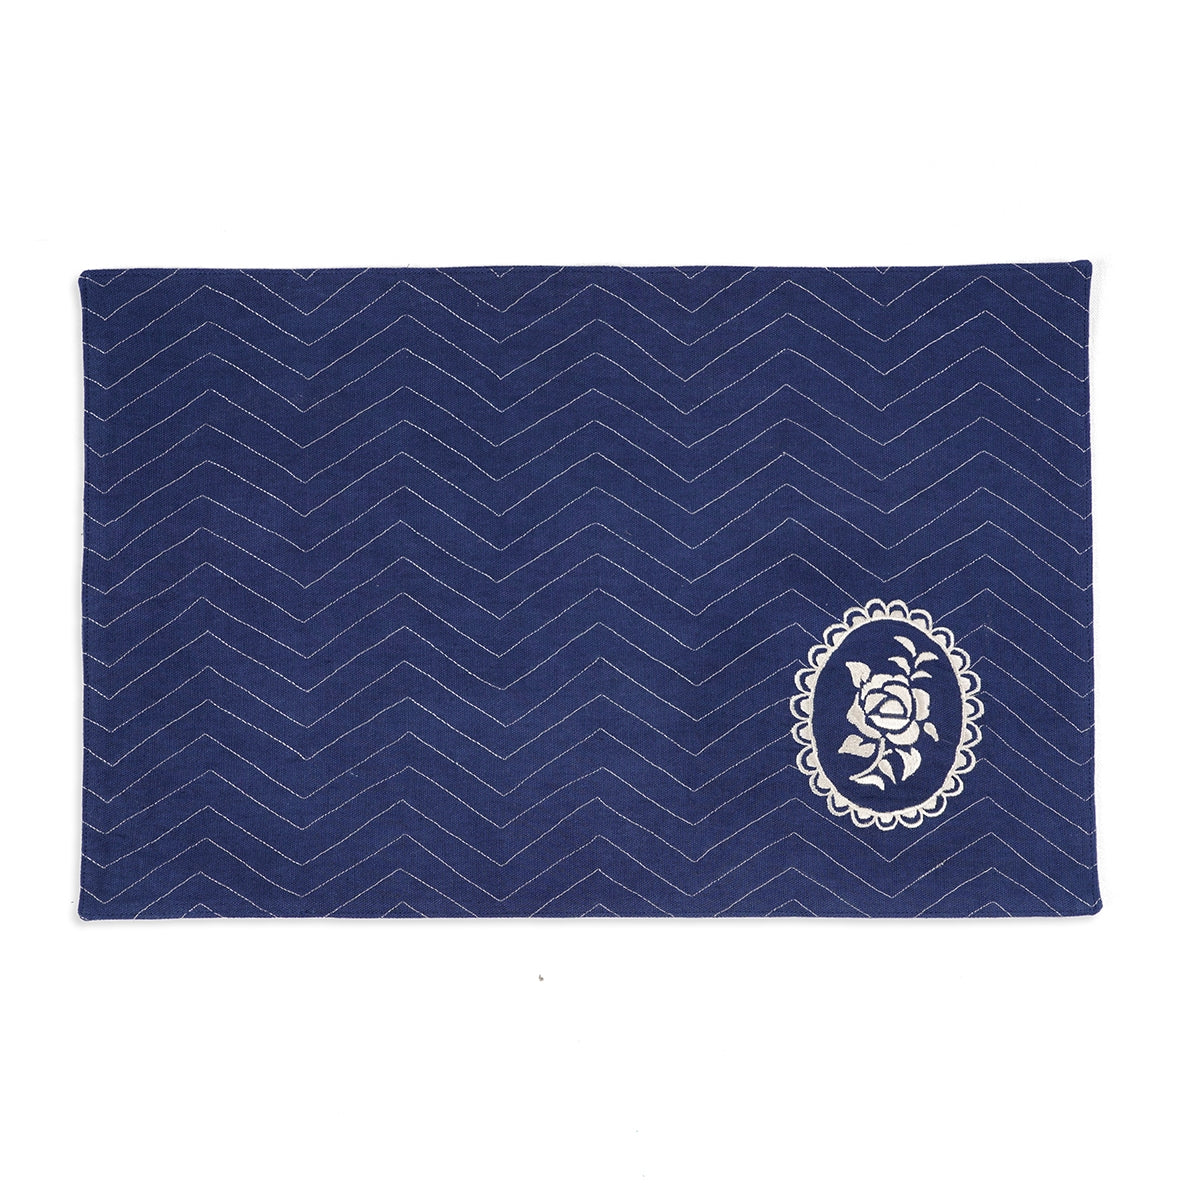 Indigo Blue cotton Placemat with chevron and vintage rose motif embroidery, 13X19 inches